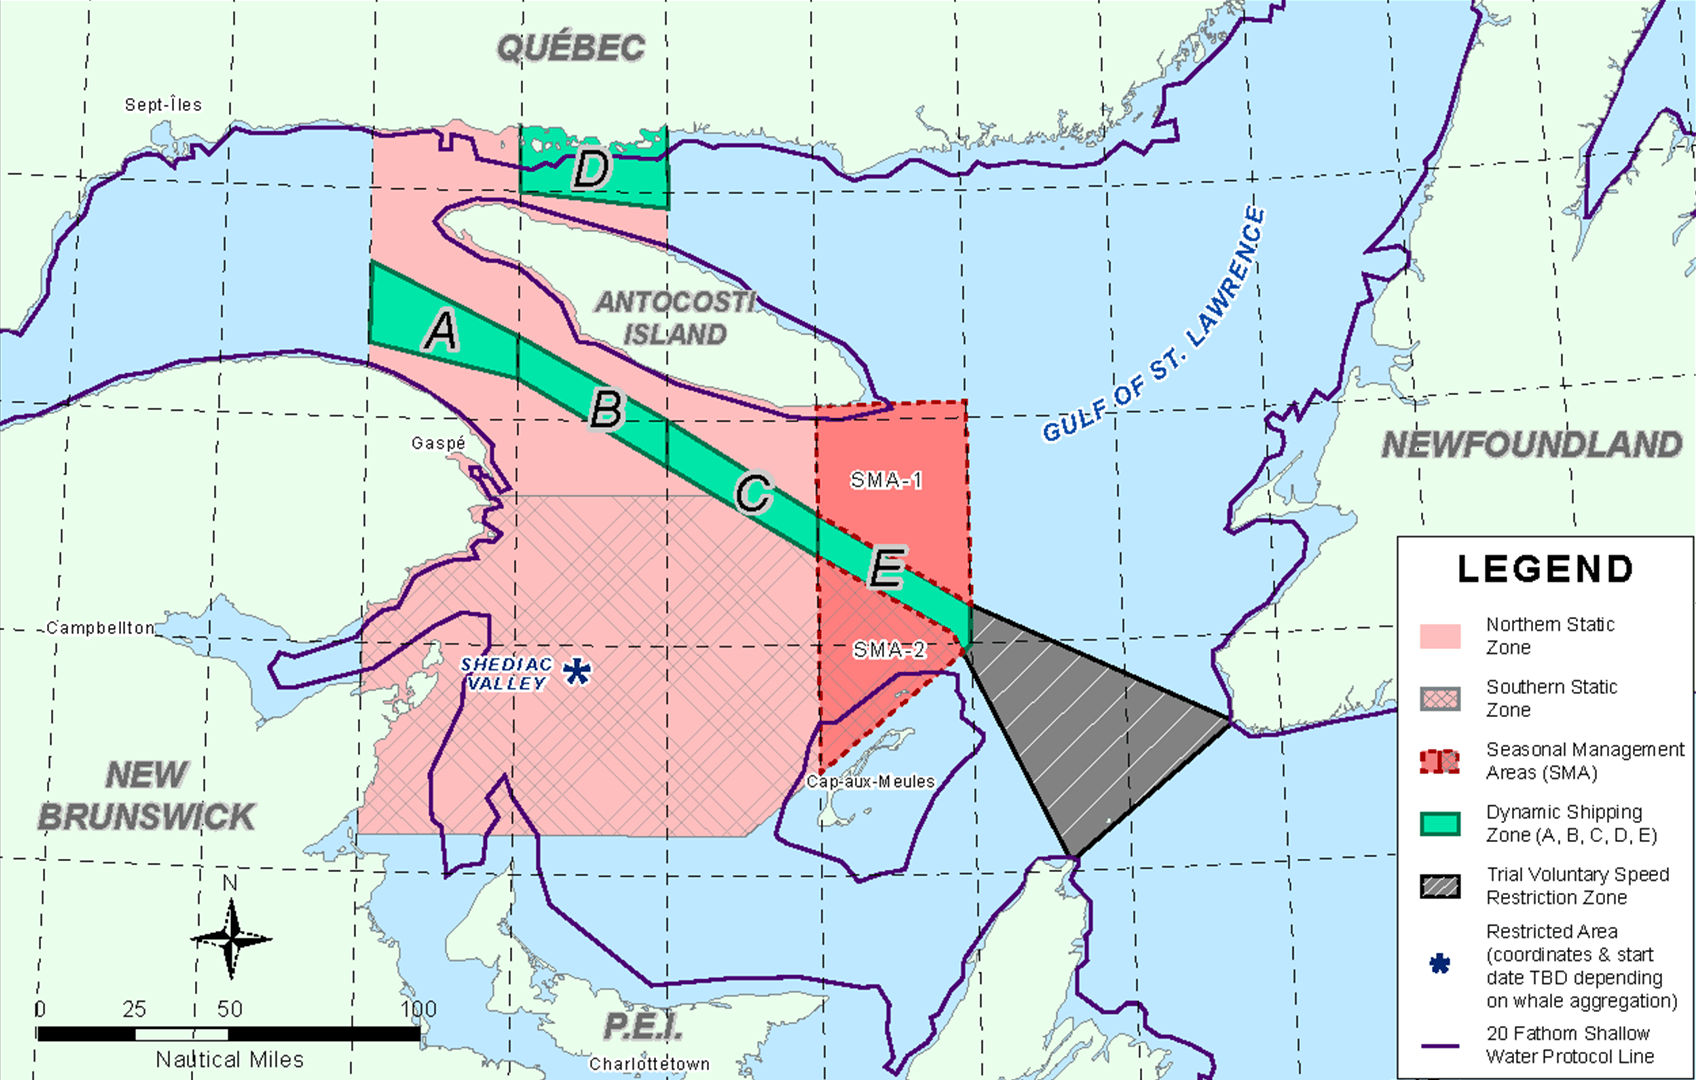 Map of the Gulf of St. Lawrence with an area in pink covering a good part of the river’s mouth from northwest of Anticosti Island, across the entire swath of water south of this island to the tip of the Gaspé Peninsula and the Magdalen Islands. Within this pink zone, a green corridor runs between the Gaspé Peninsula and Anticosti, stopping north of the Magdalen Islands. A small stretch of green corridor also runs between Anticosti Island and Quebec’s Côte-Nord (North Shore) region.